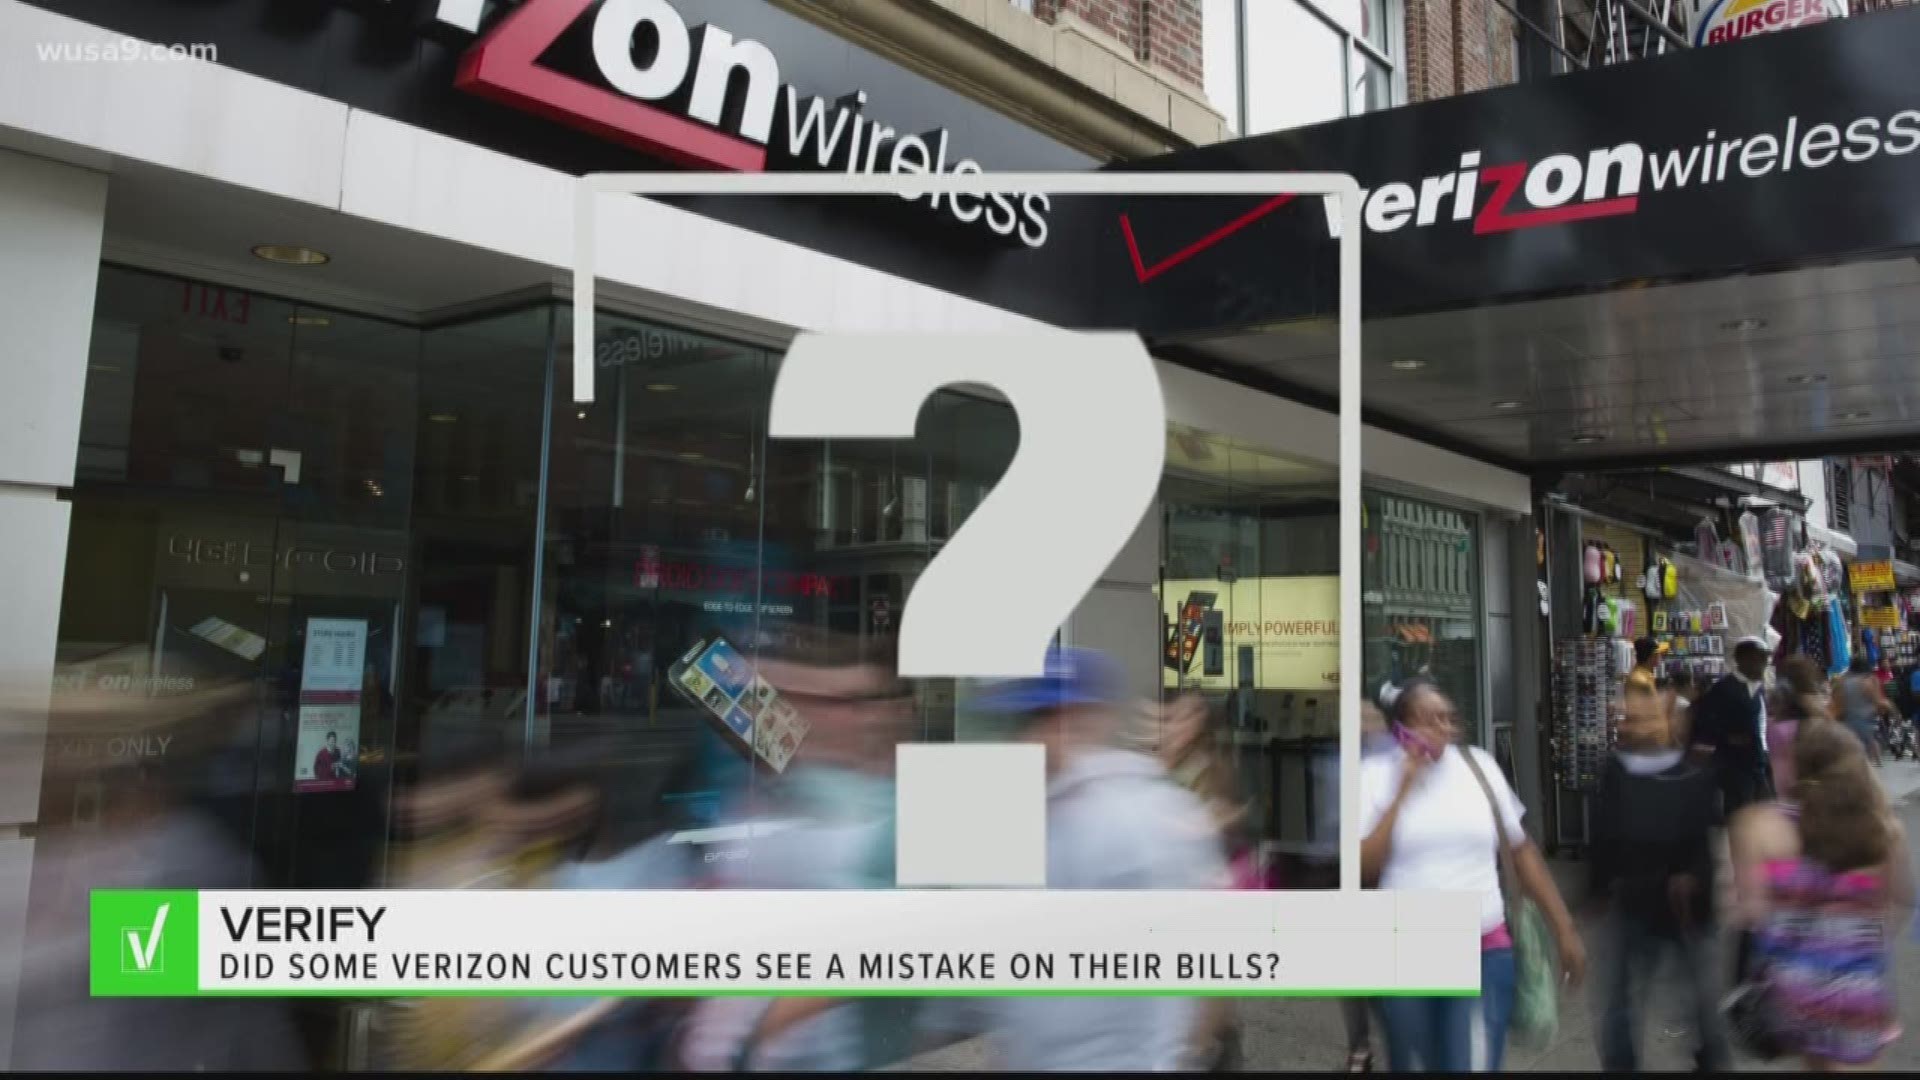 A post with 53k shares now has Verizon customers double checking their bills. The telecommunications company confirmed some bills may have a glitch, but it's okay.